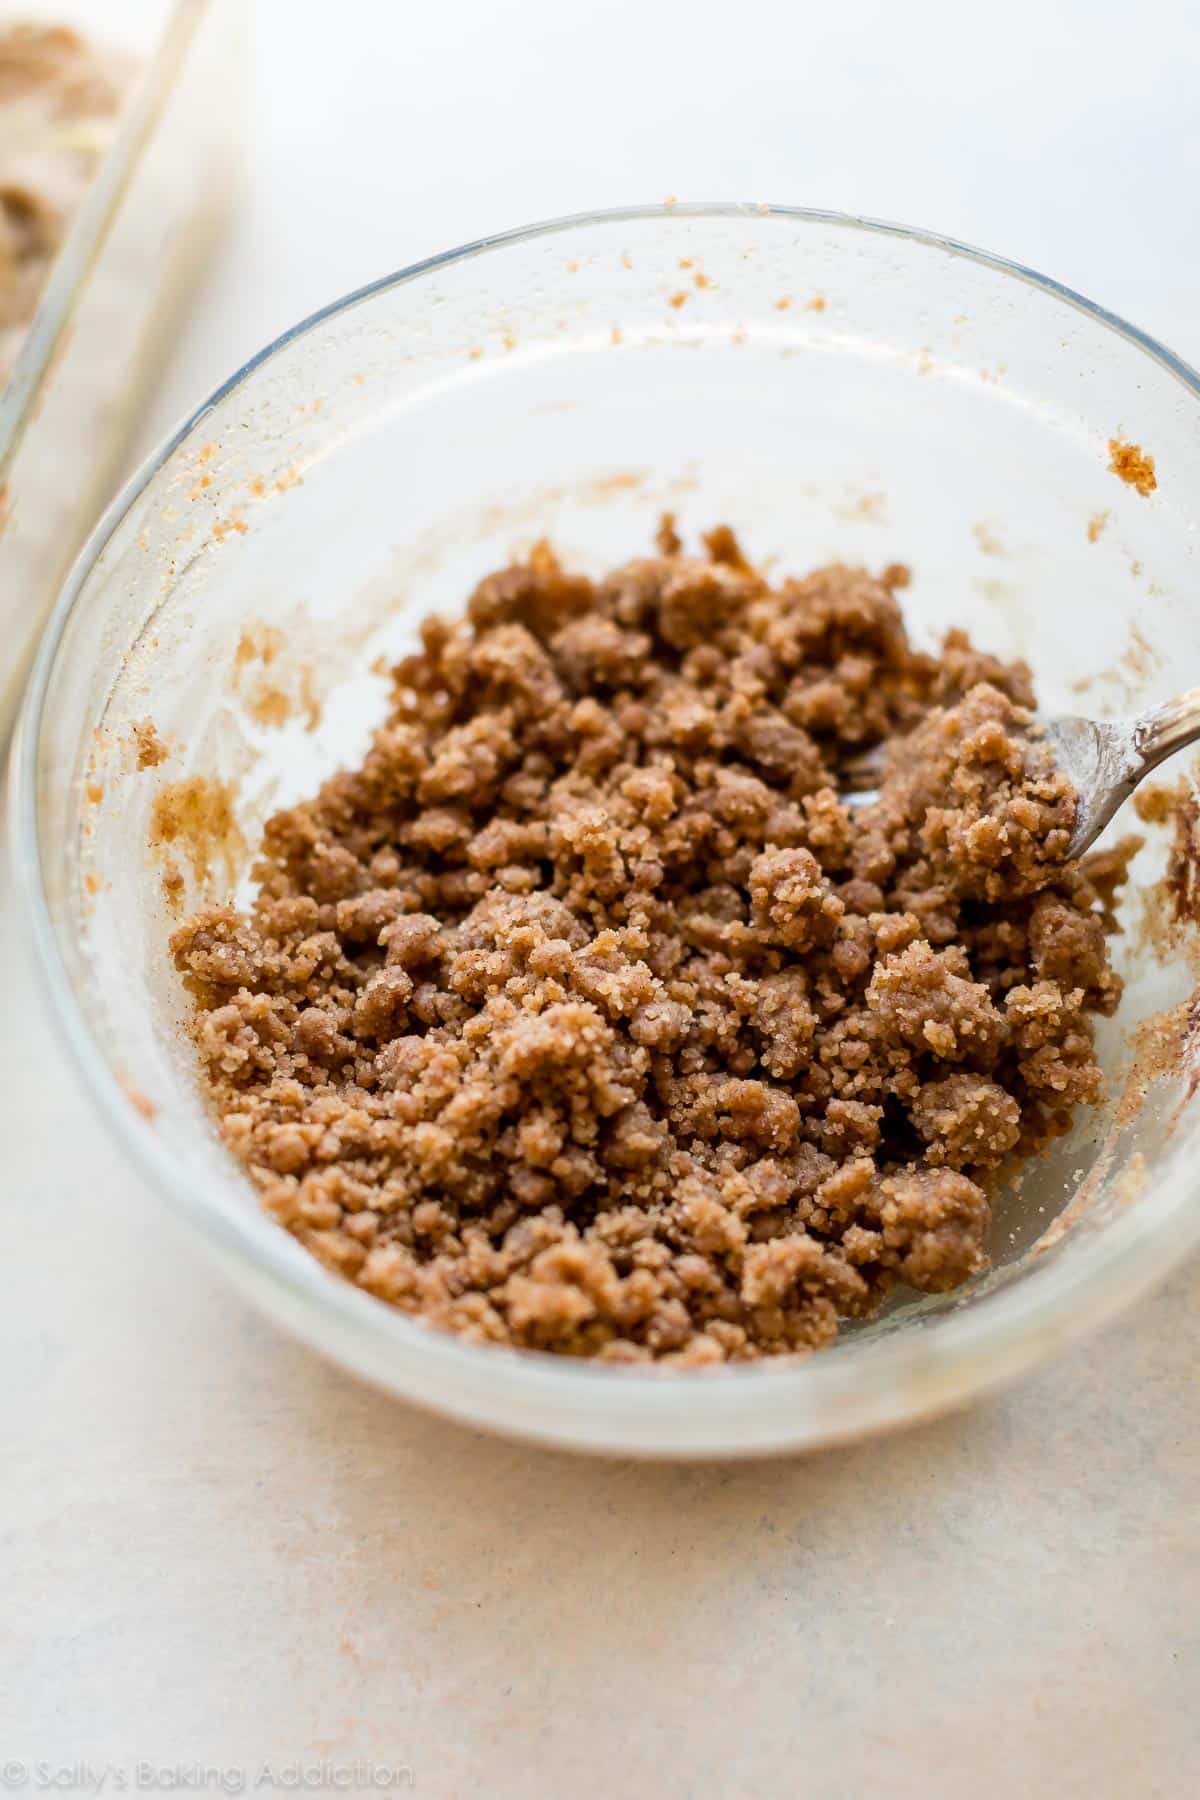 Crumb cake topping in a glass bowl